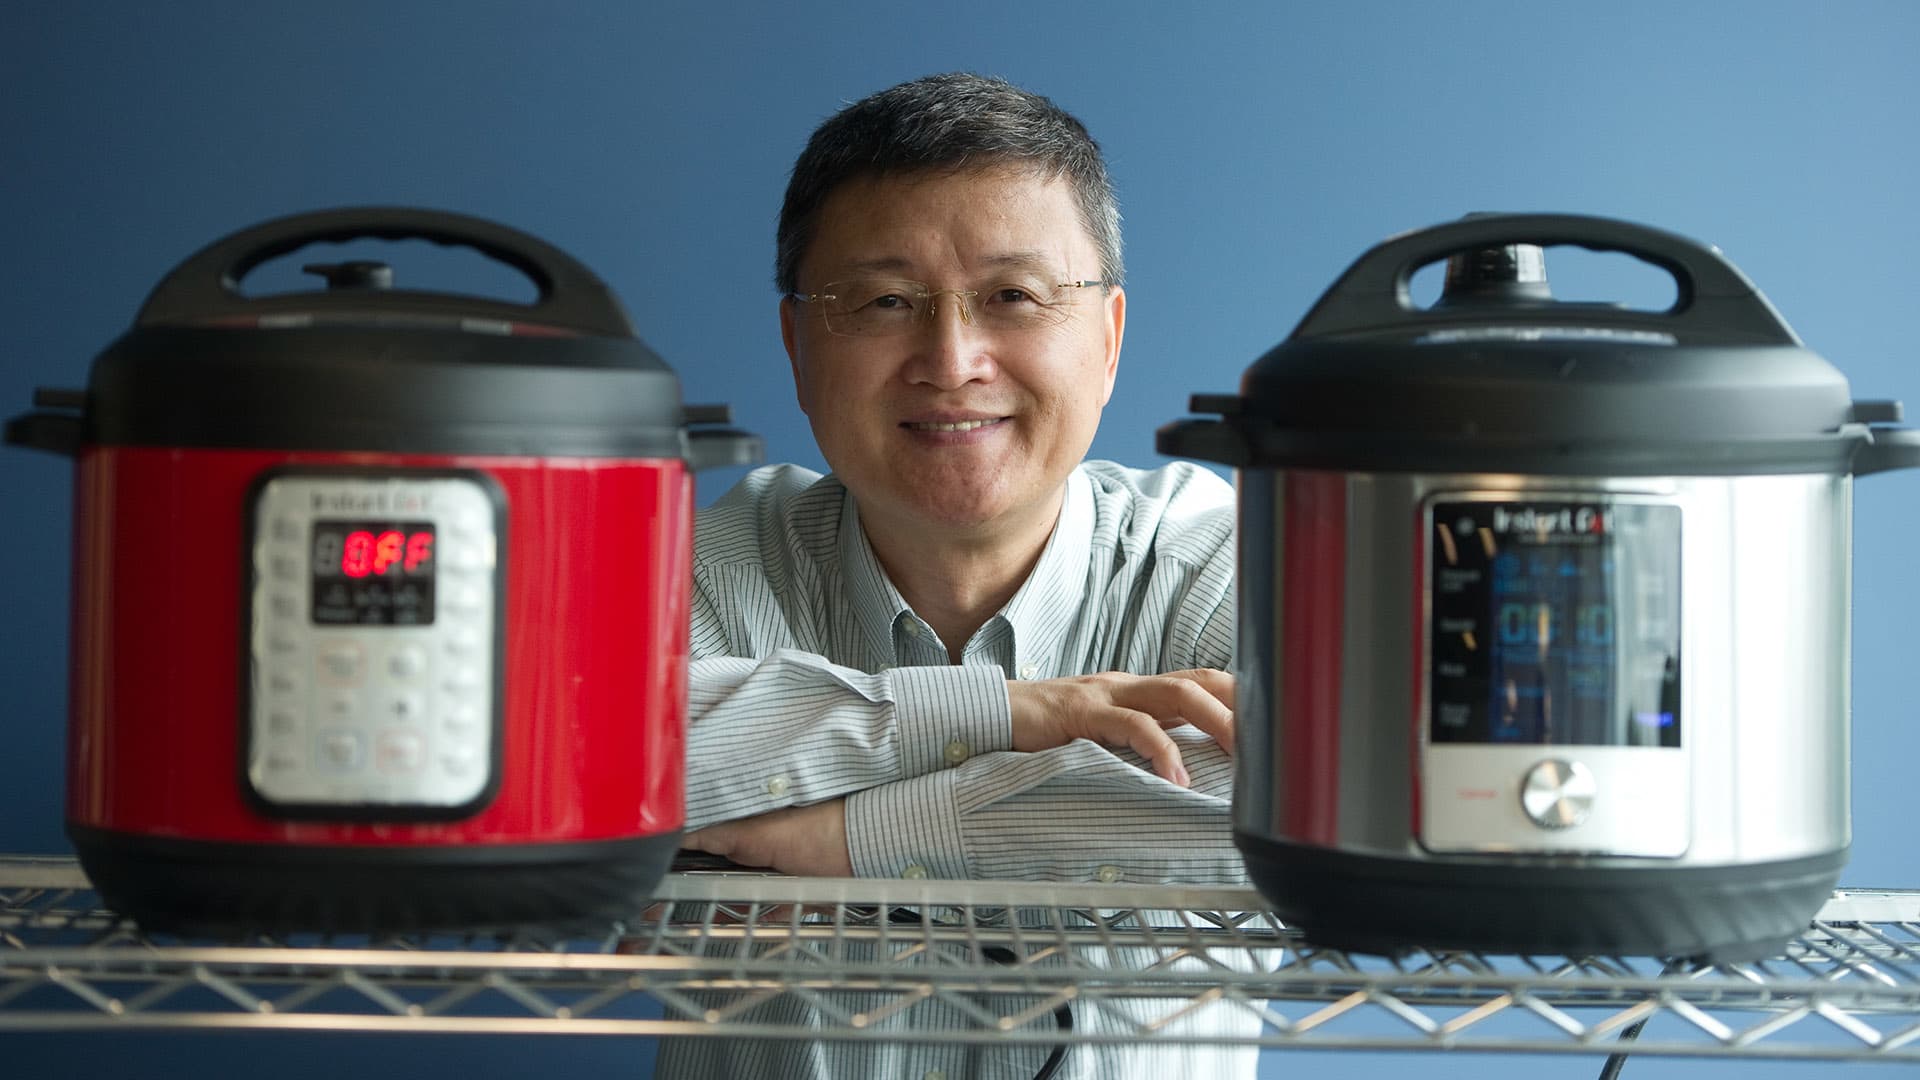 The newest Instant Pot innovation? A coffee and espresso maker in